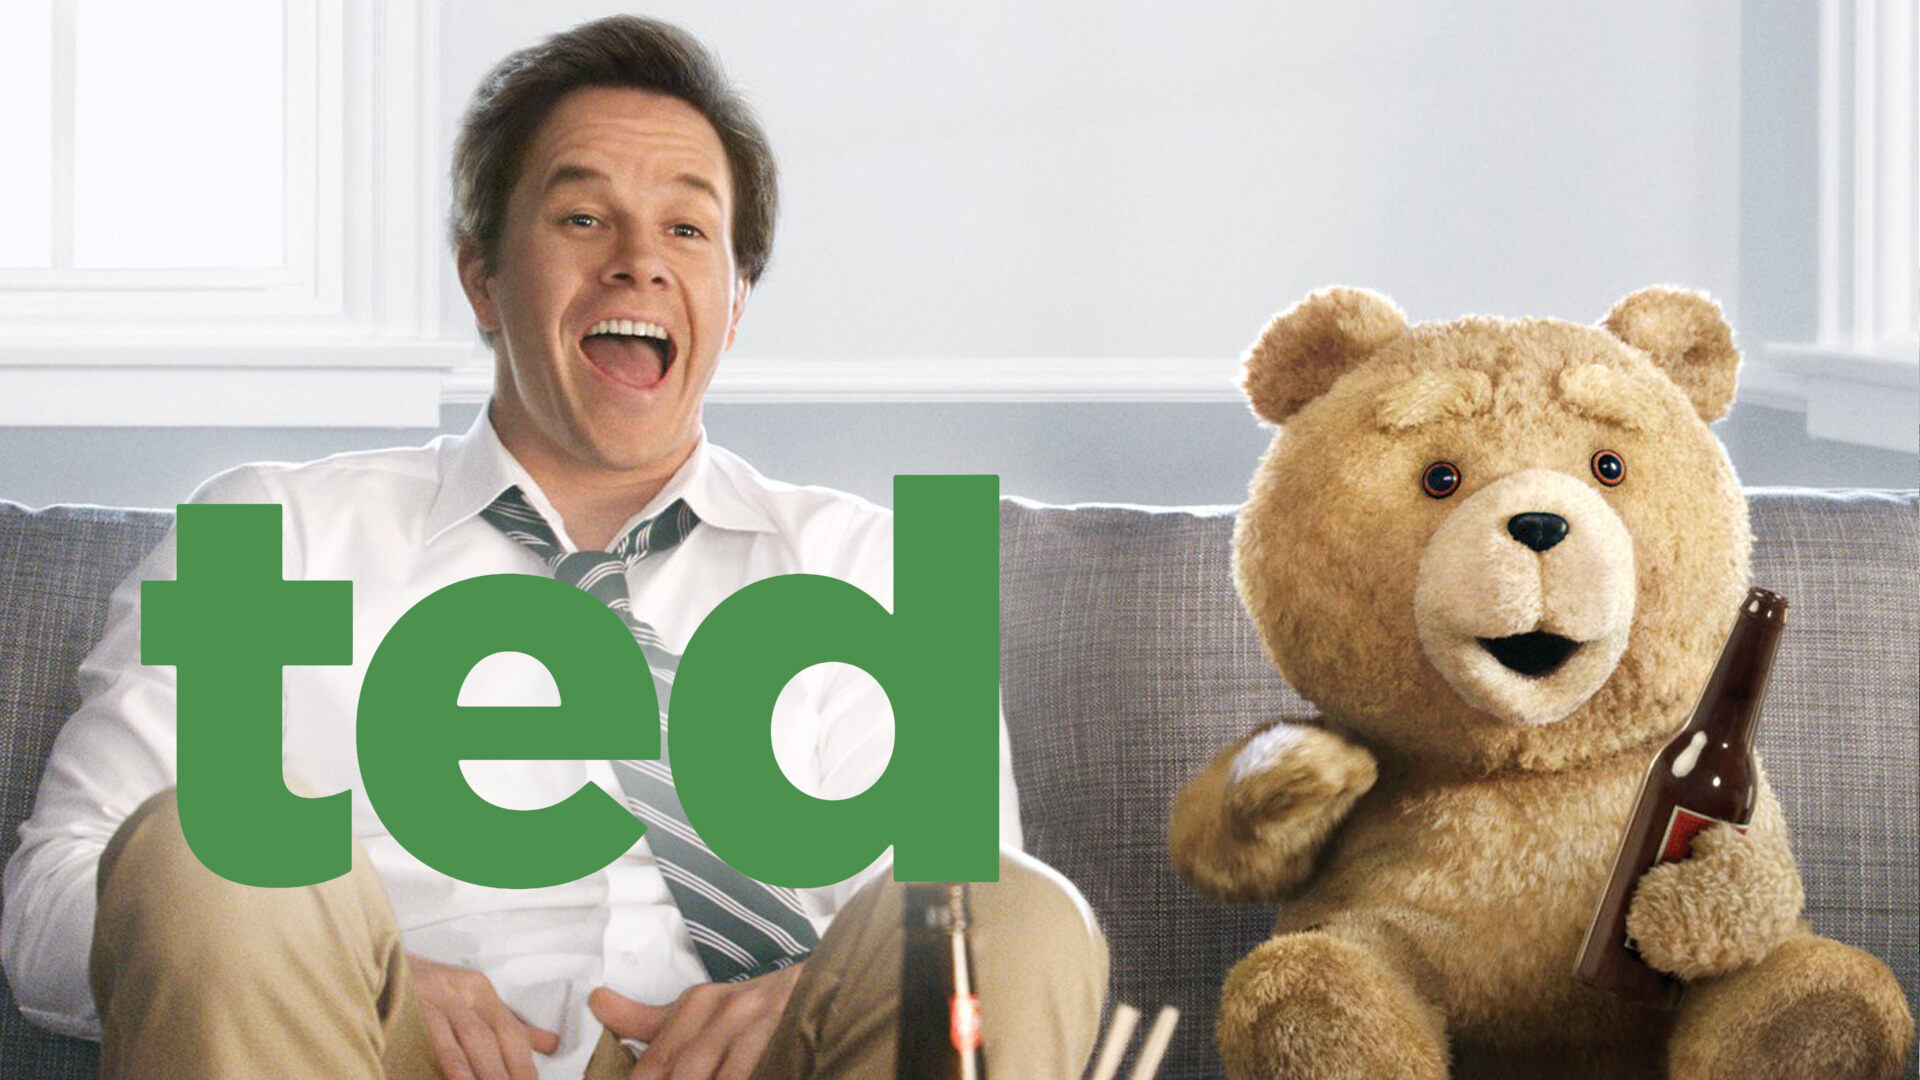 33 Facts about the movie Ted 